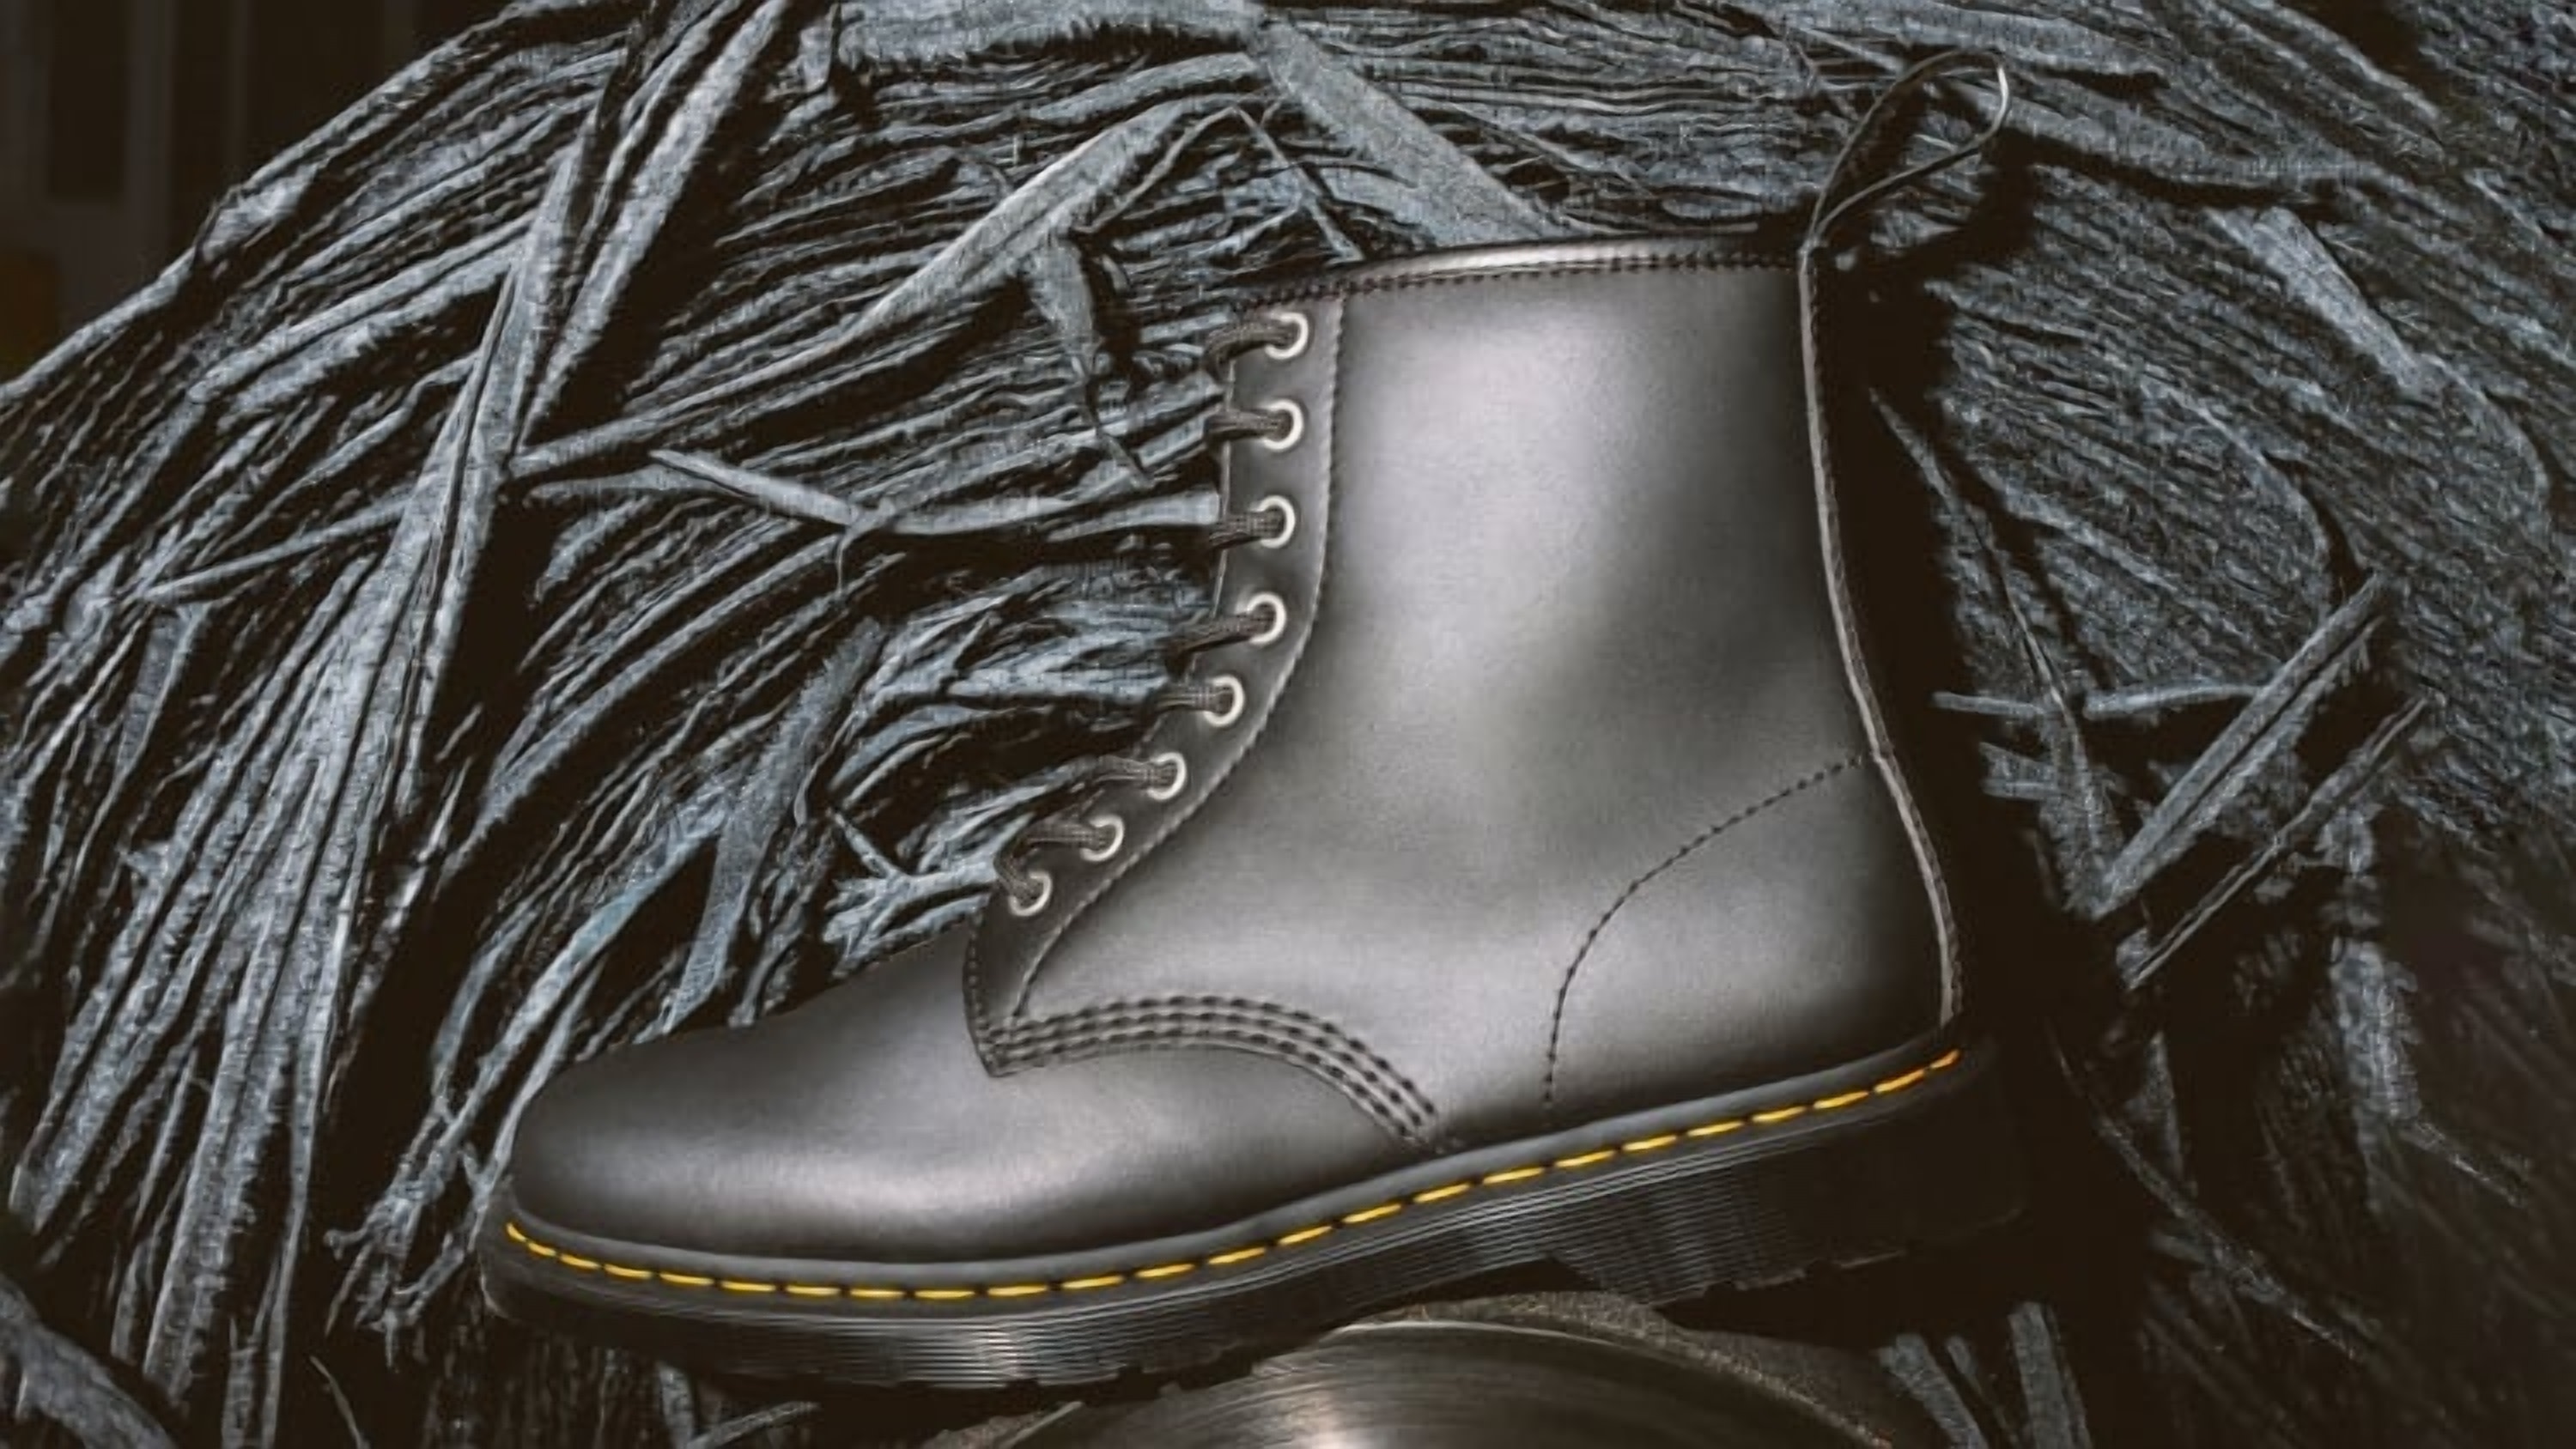 KnowESG_Dr. Martens Launches Boots Made from Waste